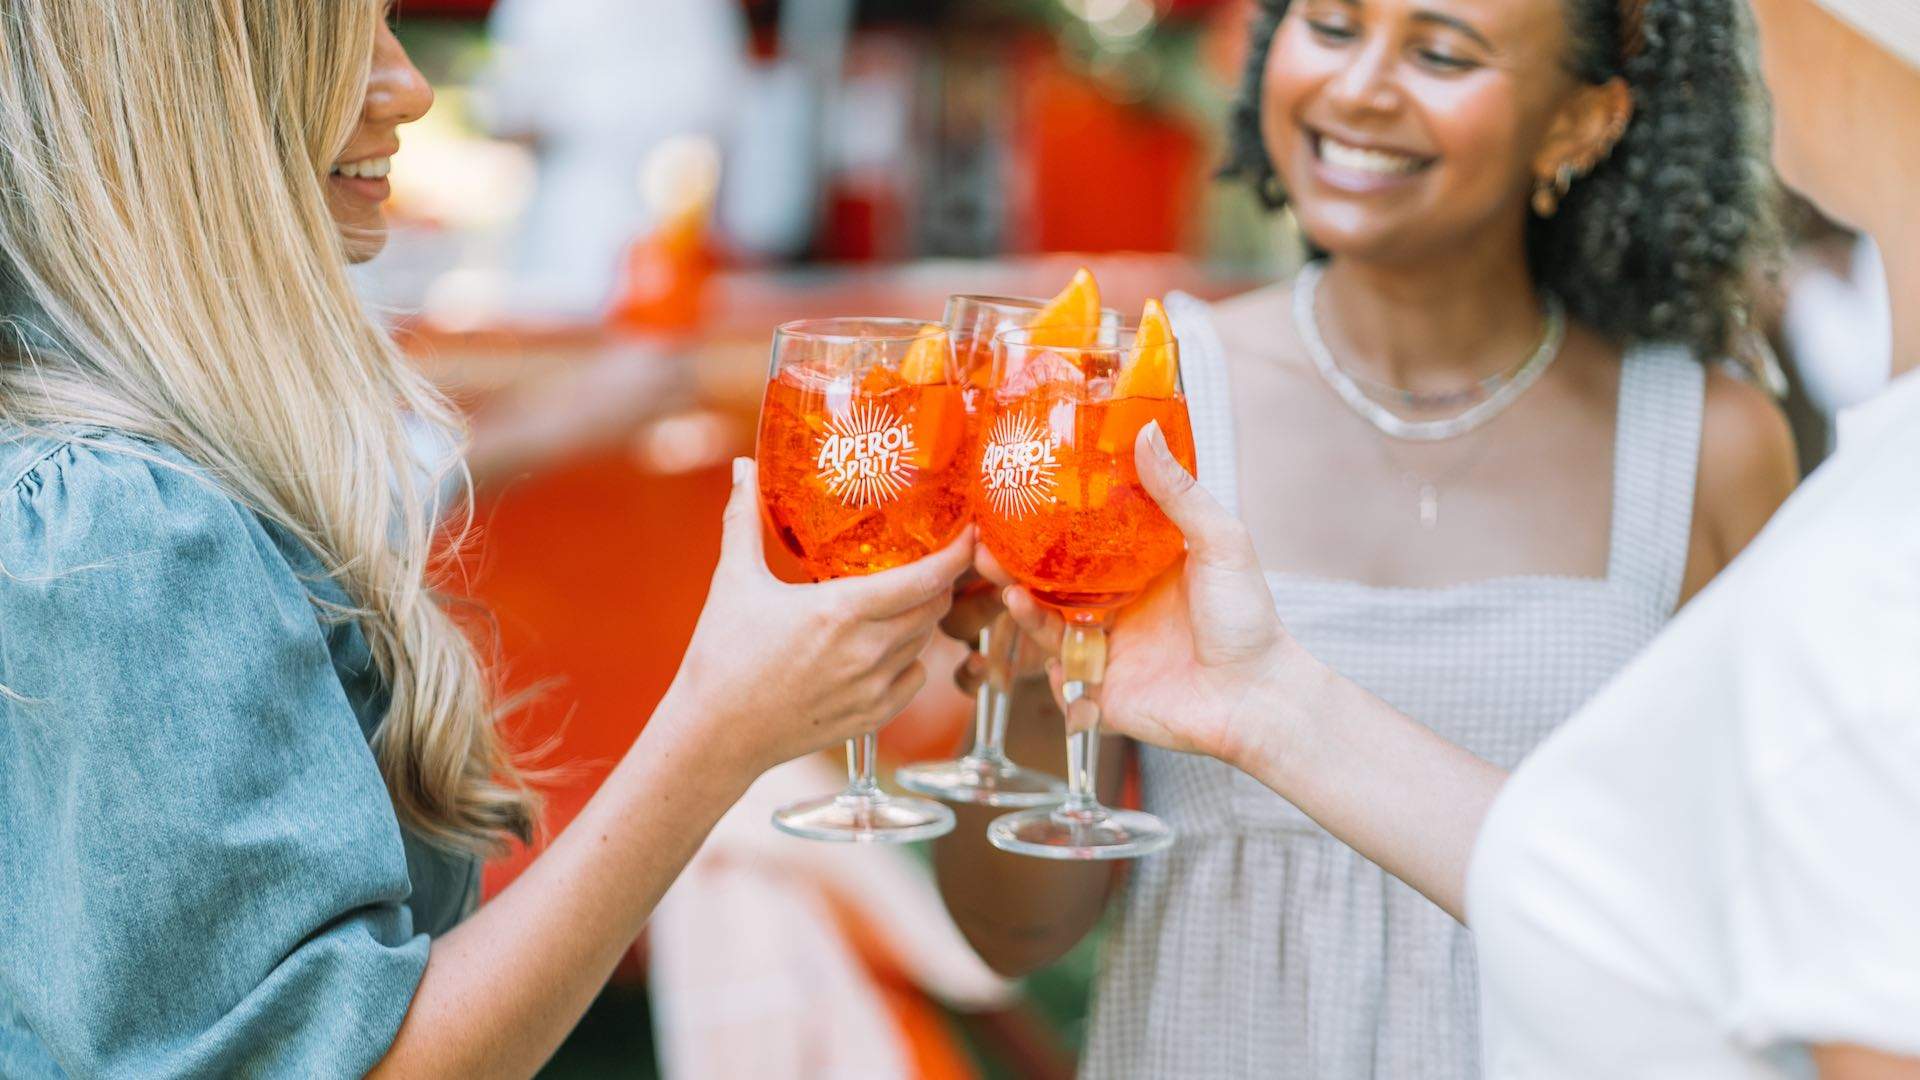 Where to Sip a Spritz in the Sun Now the Weather's Warming Up (And Get Your Drink on the House)